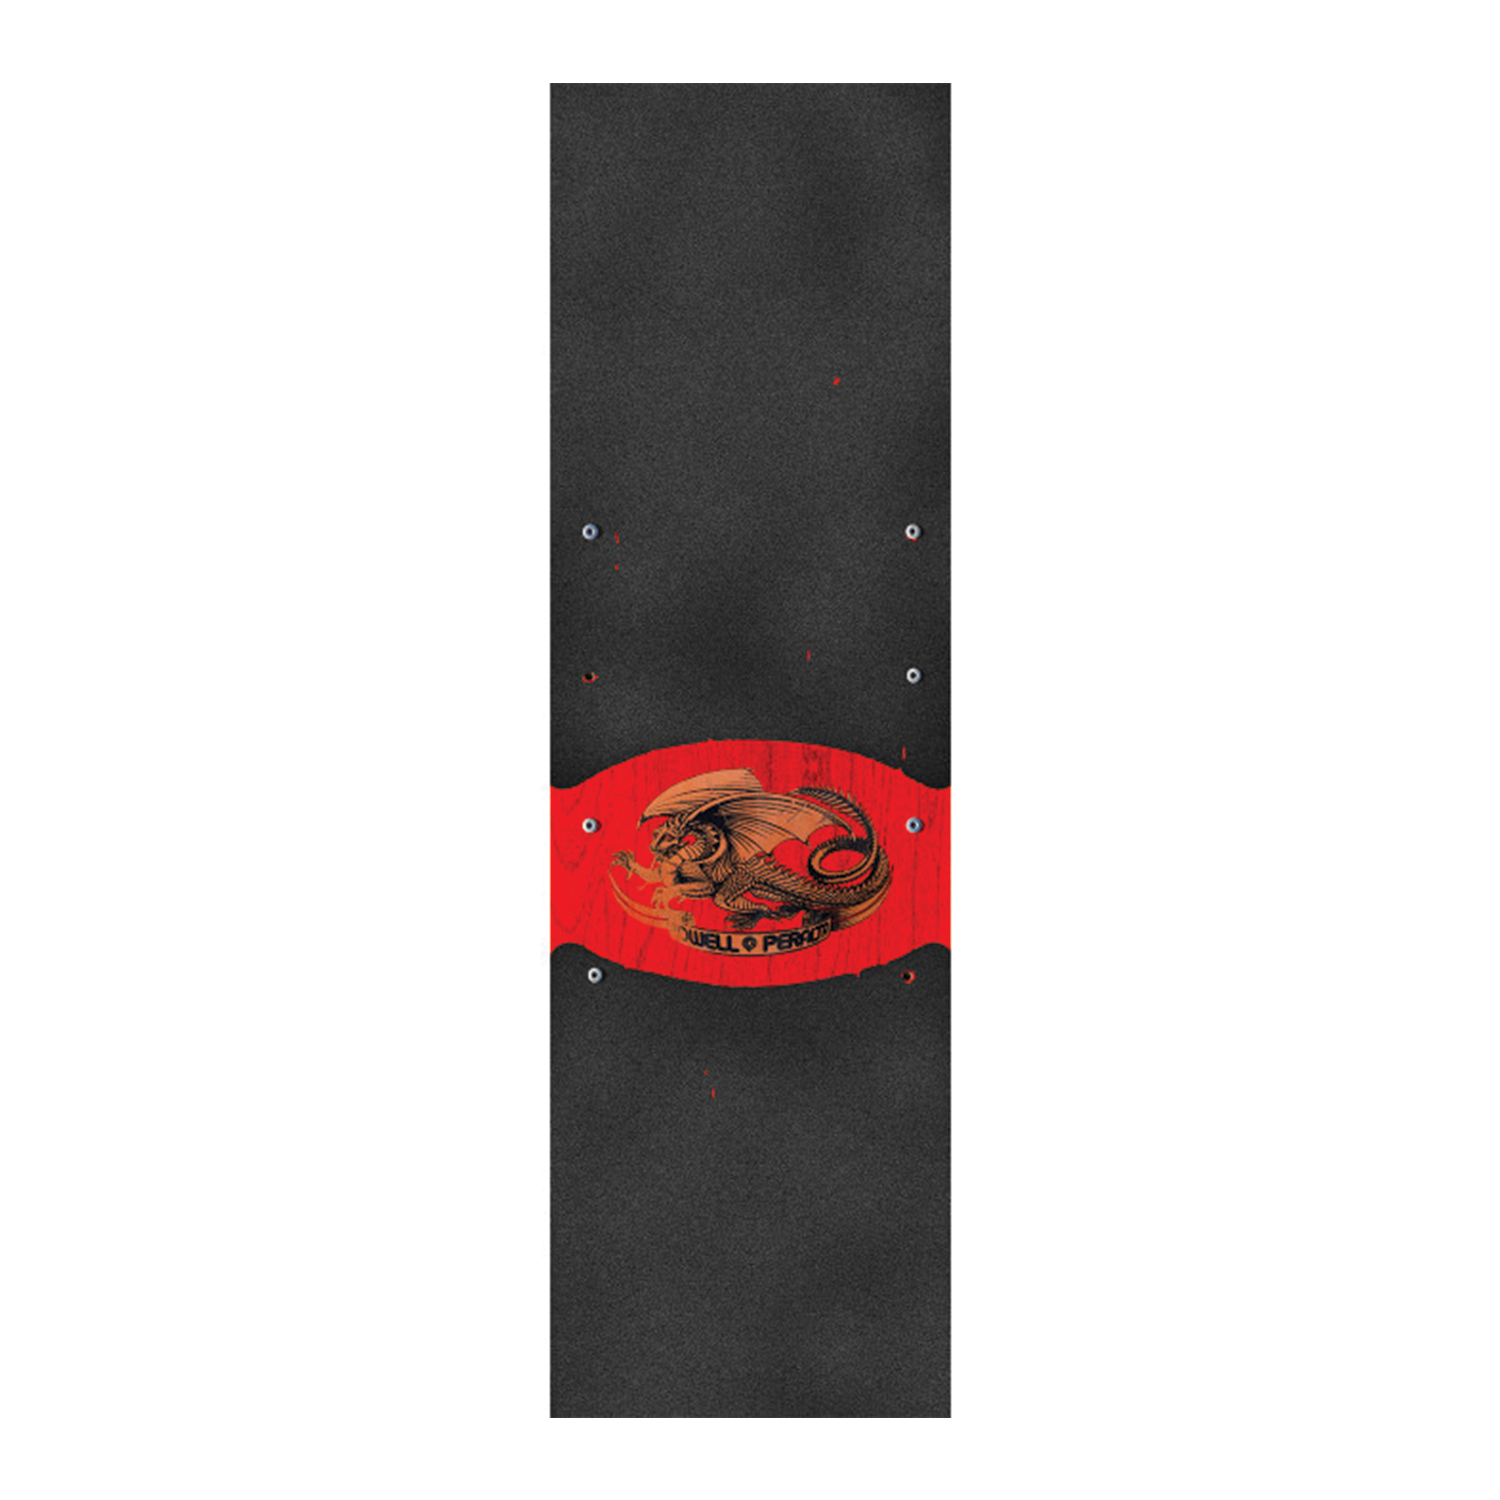 POWELL PERALTA RED OVAL DRAGON GRIP TAPE SHEET 9X33